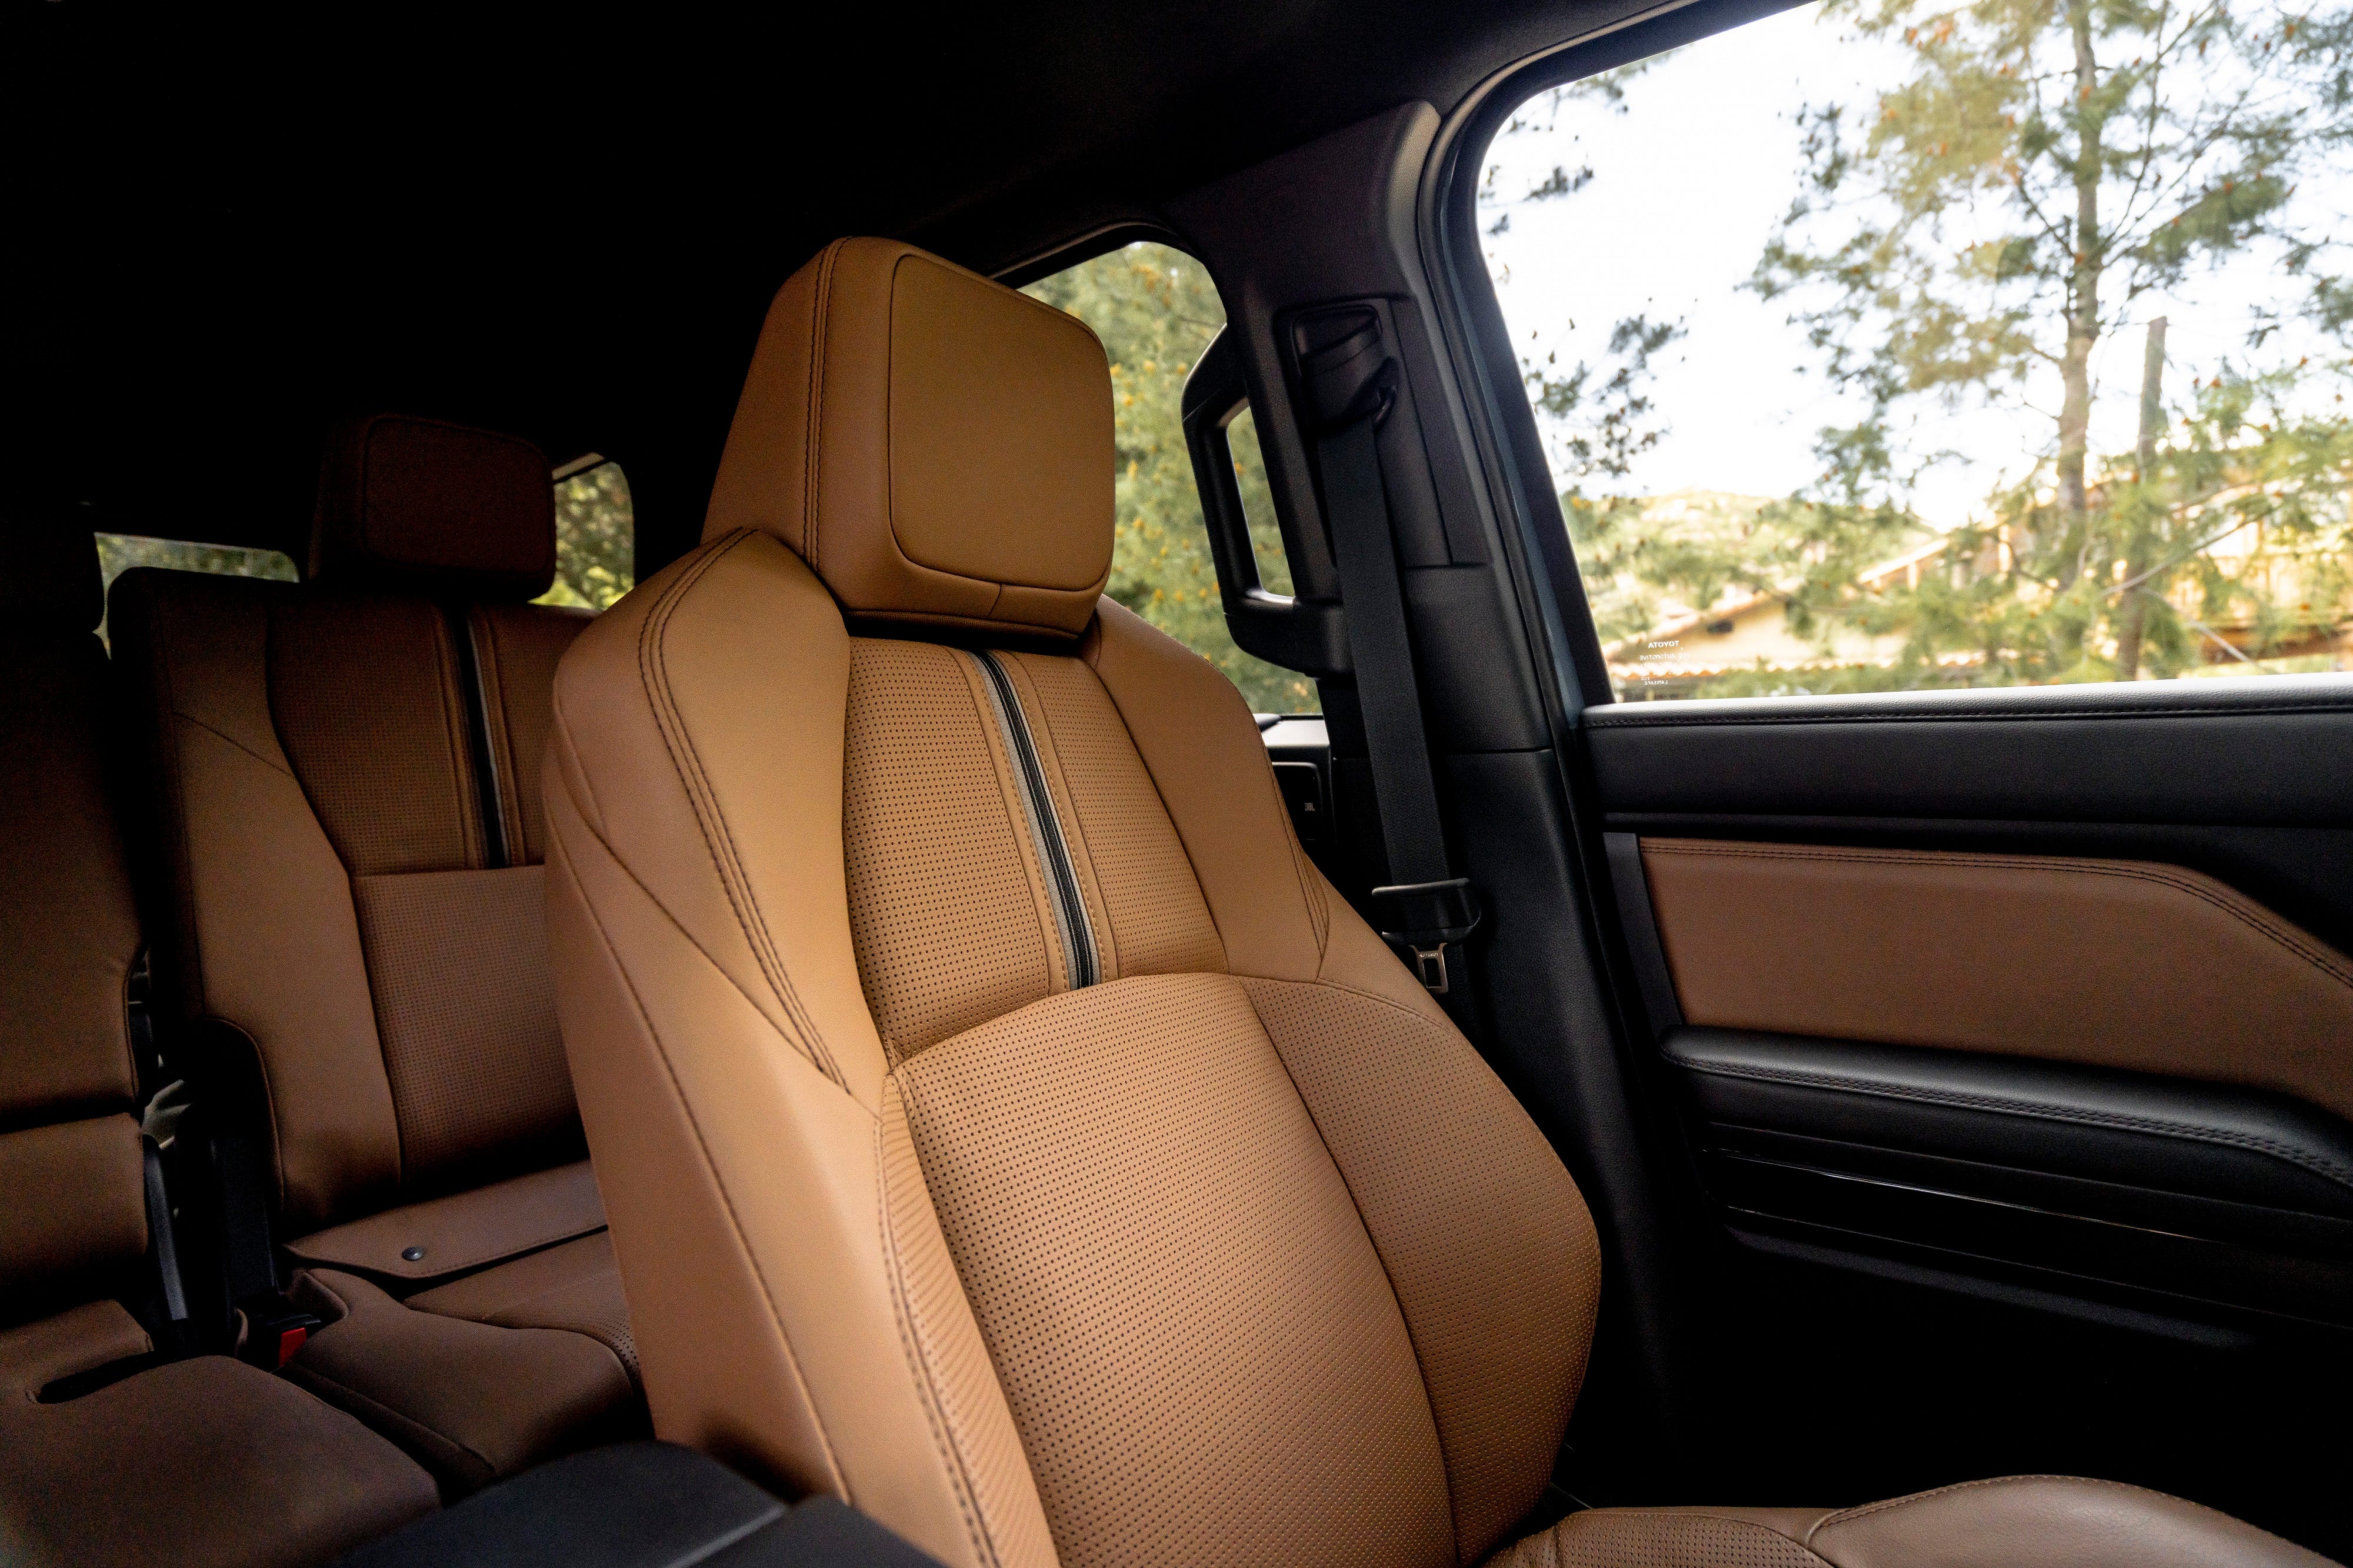 <p>The sand brown leather seats are evocative of the <span>"Baja desert racing" aesthetic that Toyota is going for, though with a bit more comfort — including, in the Platinum model, heated second-row seats.</span></p>